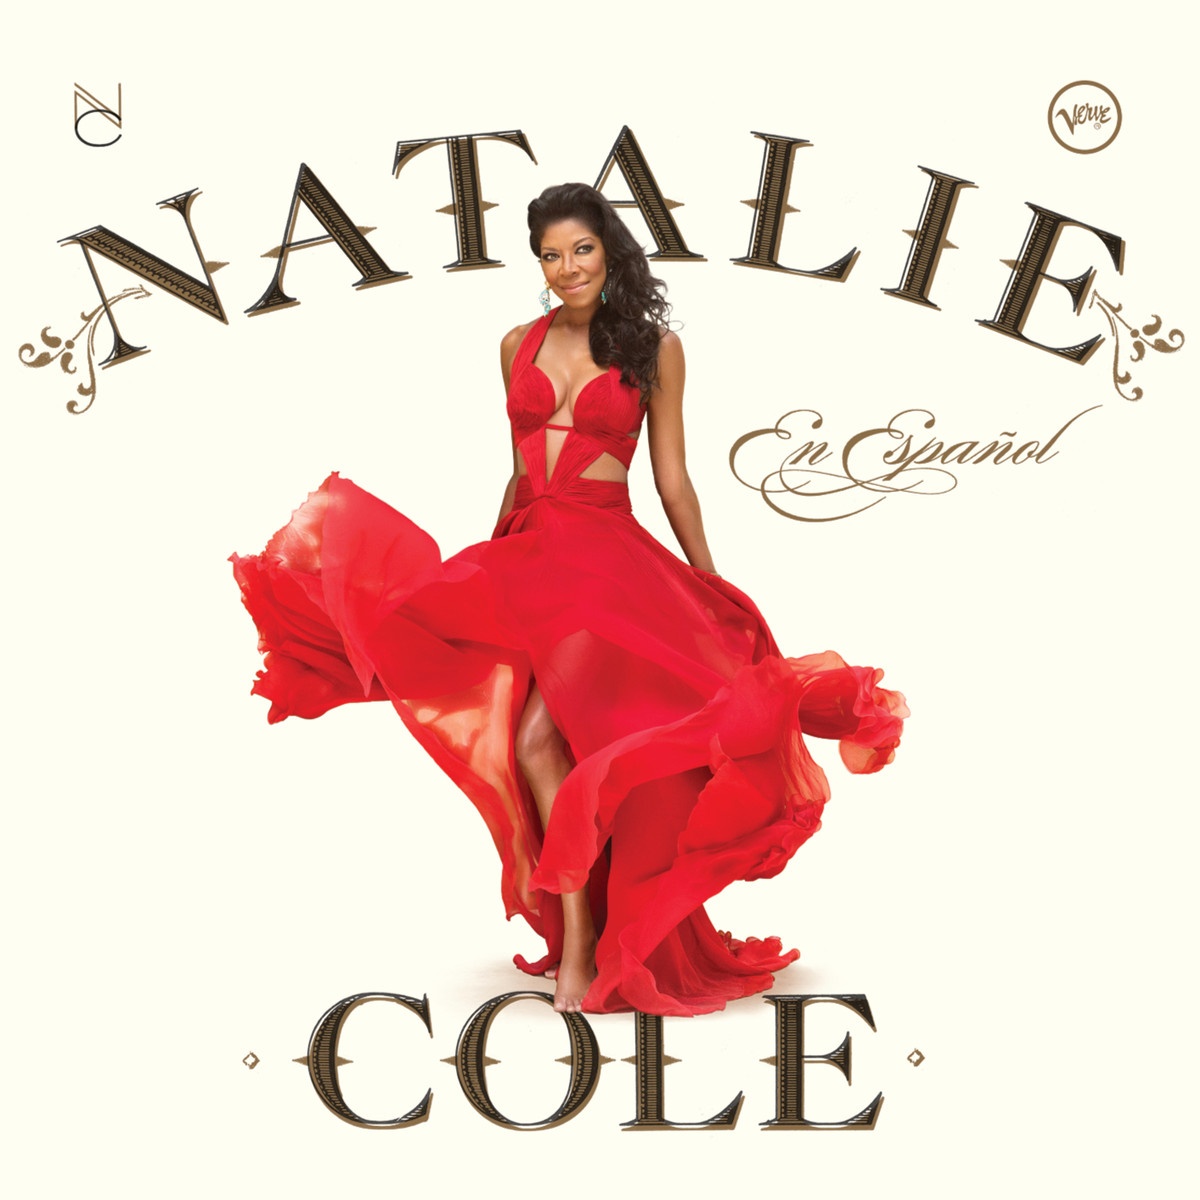 Ace rcate Ma s Duet with Nat '' King'' Cole